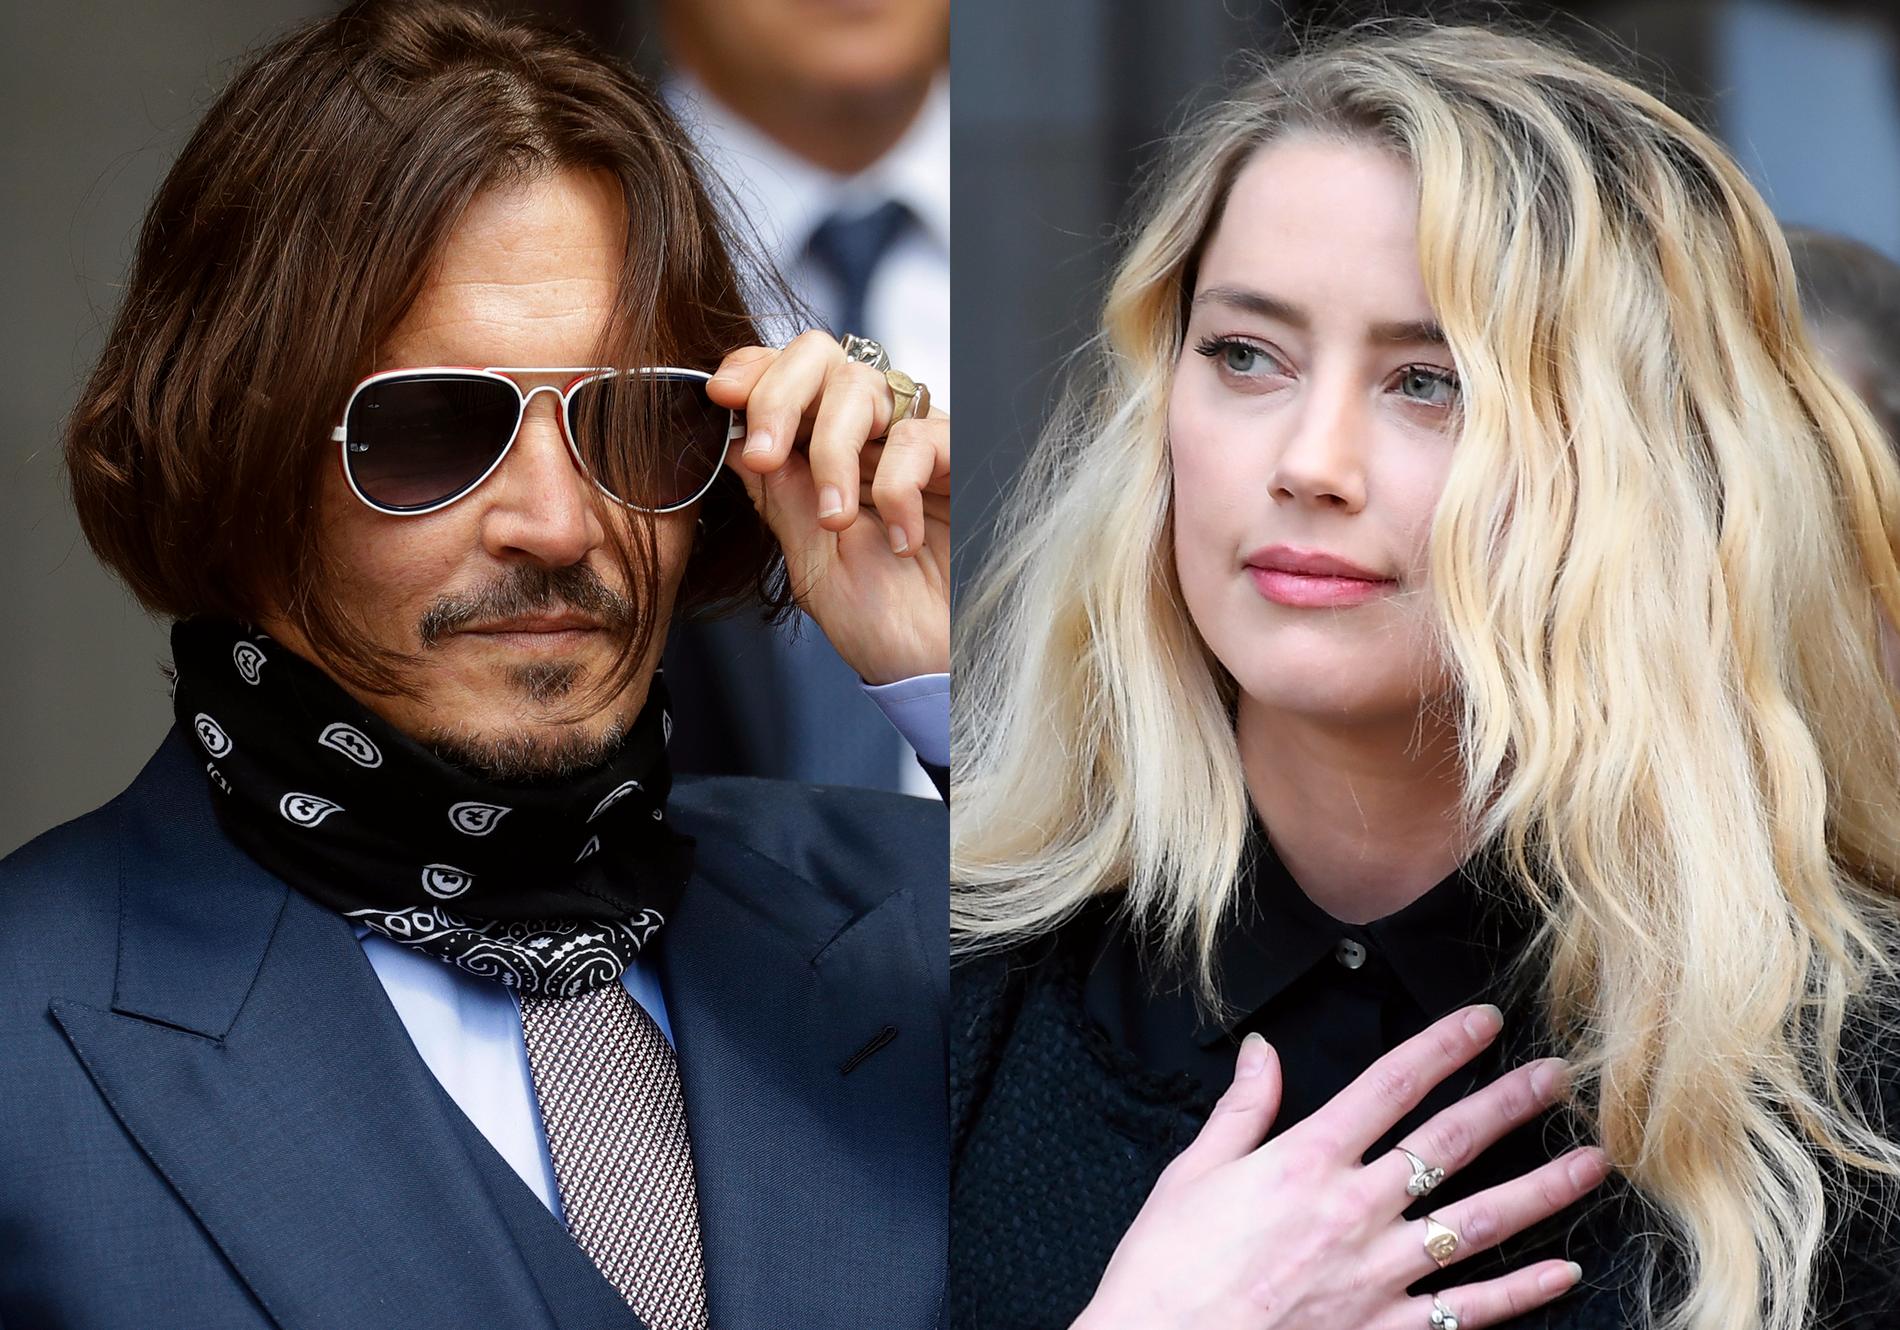 Today Johnny Depp and Amber Heard meet in court - VG